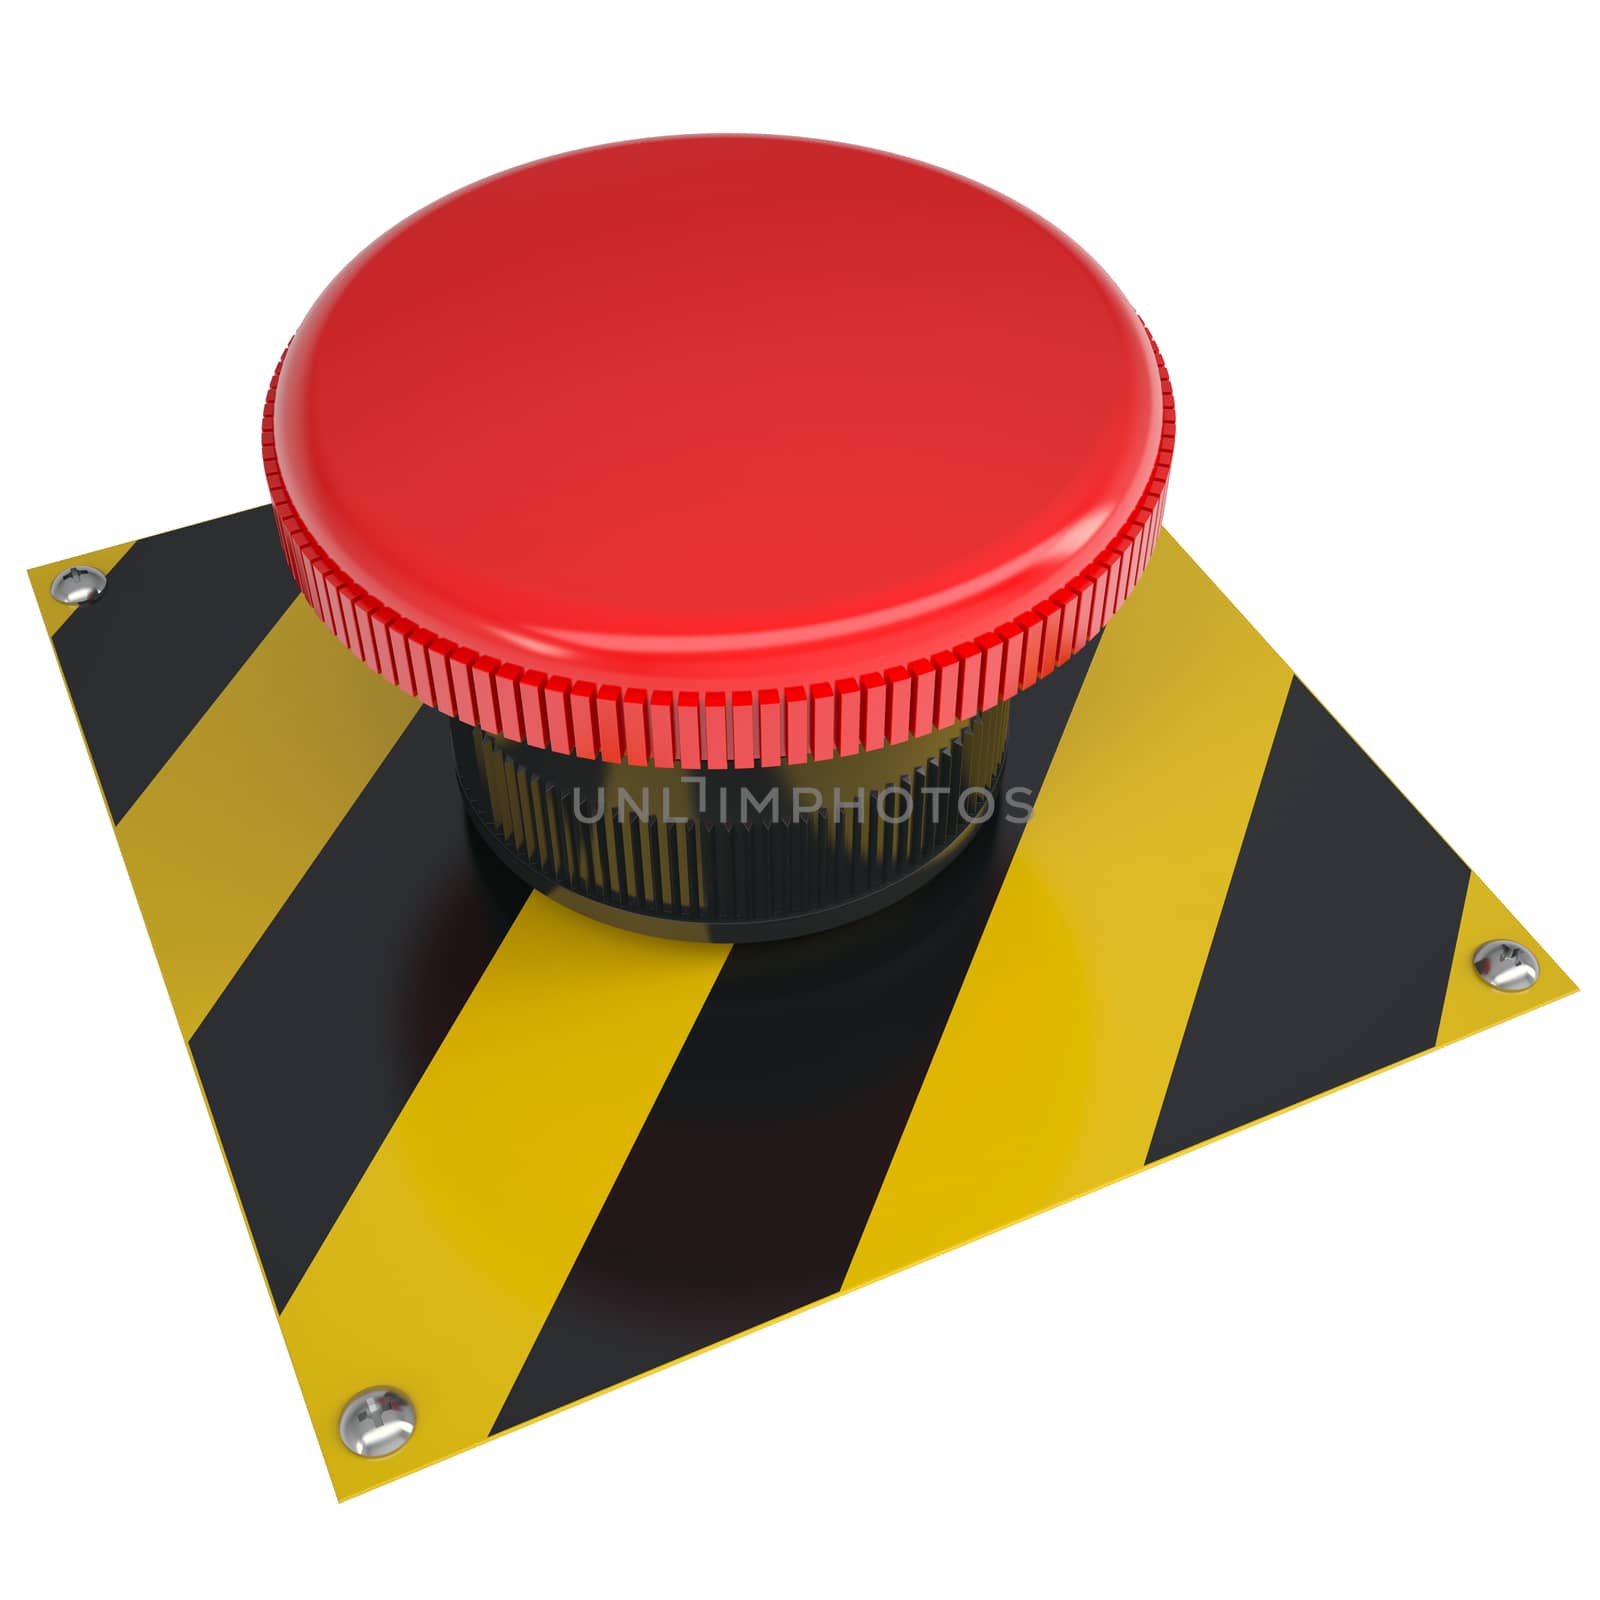 The red button on the base. Isolated render on a white background